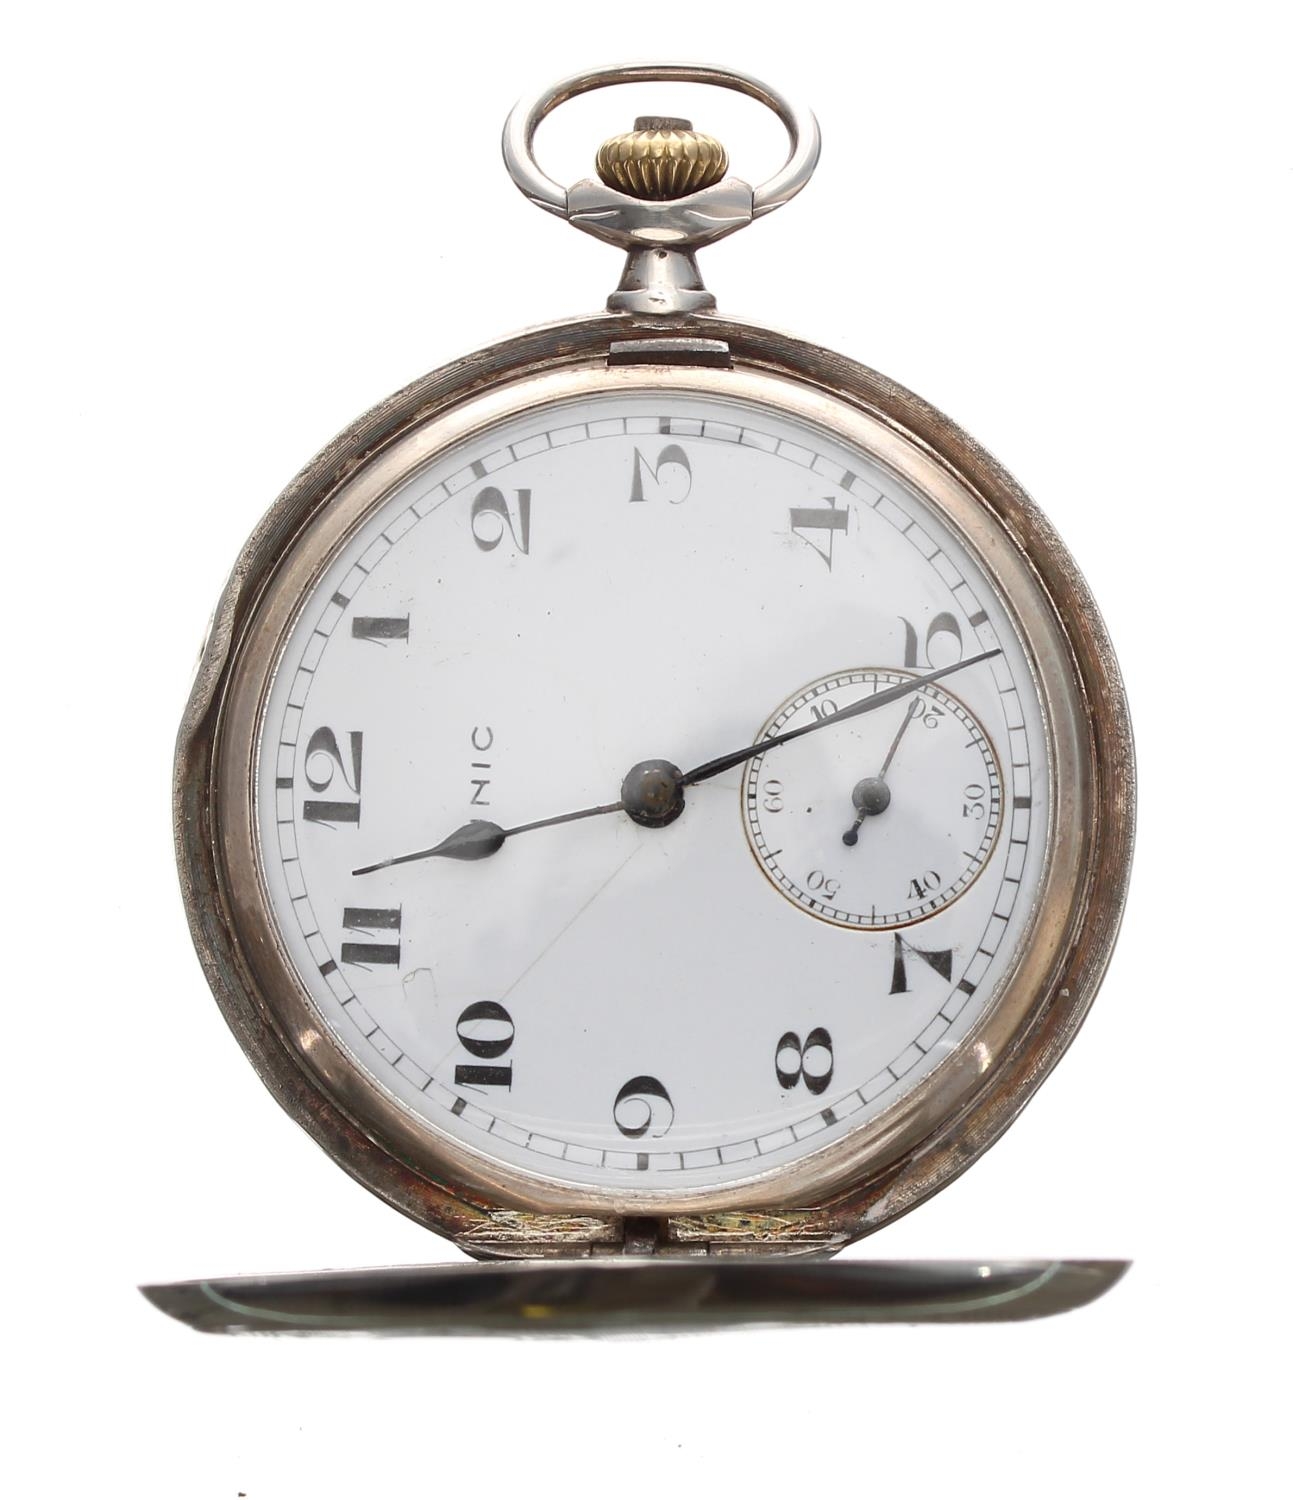 Unic silver (0.900) lever hunter pocket watch, signed movement with compensated balance and